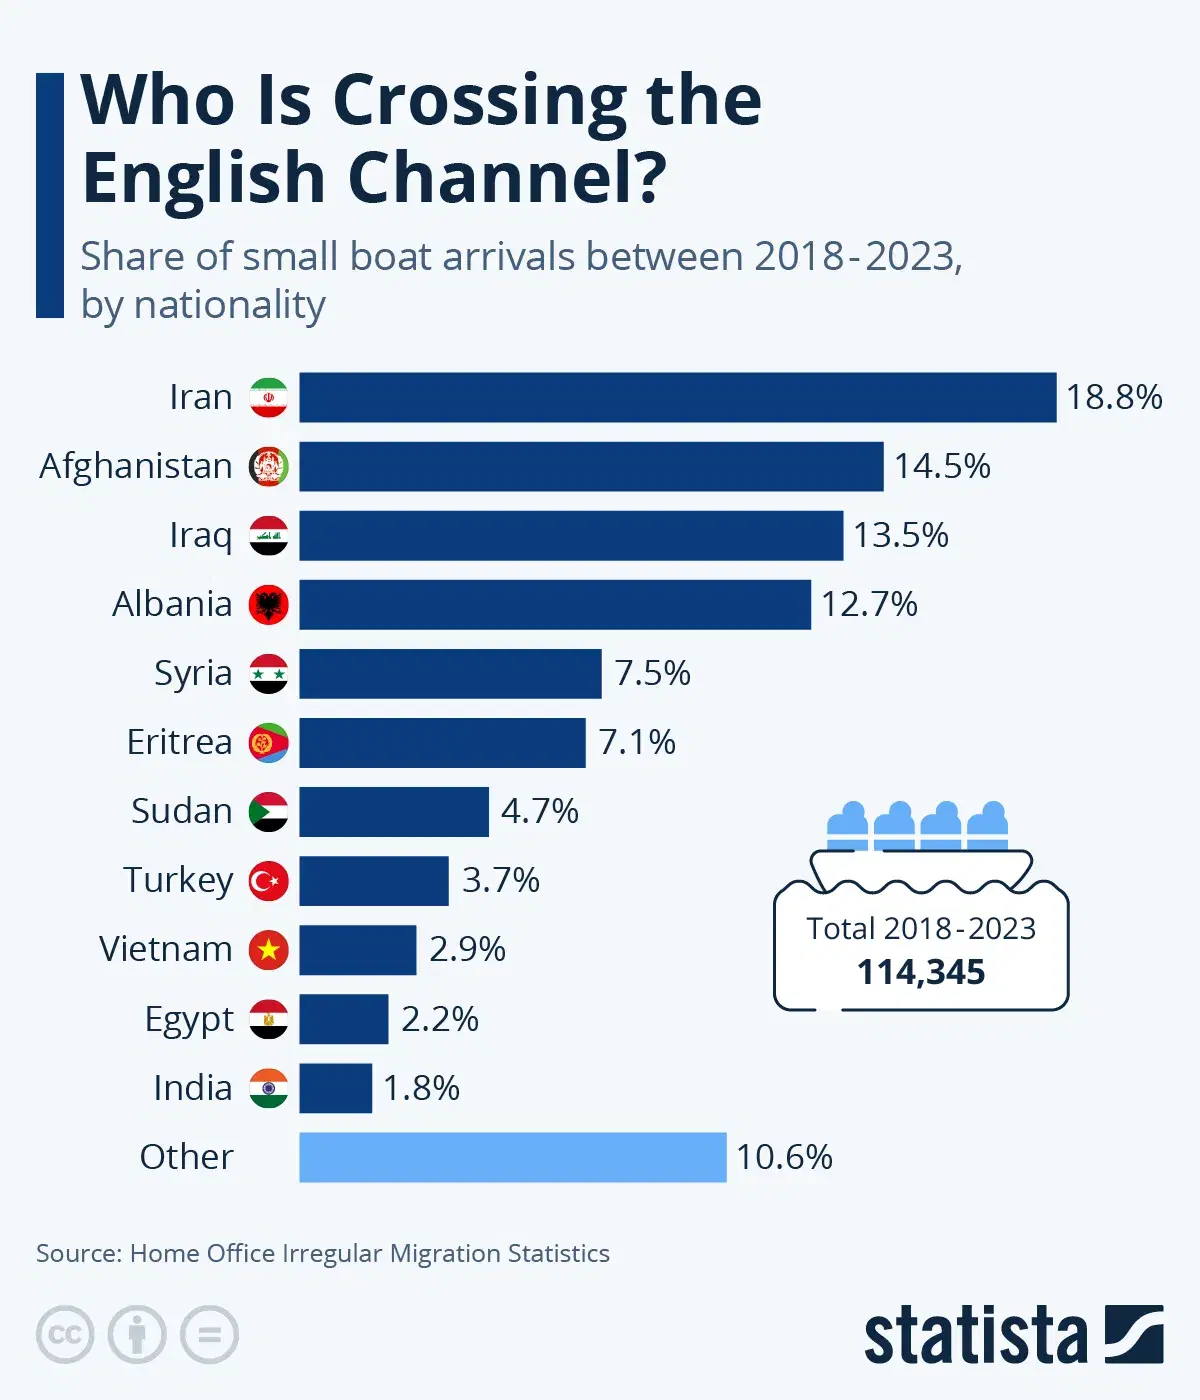 Who Is Crossing the English Channel?